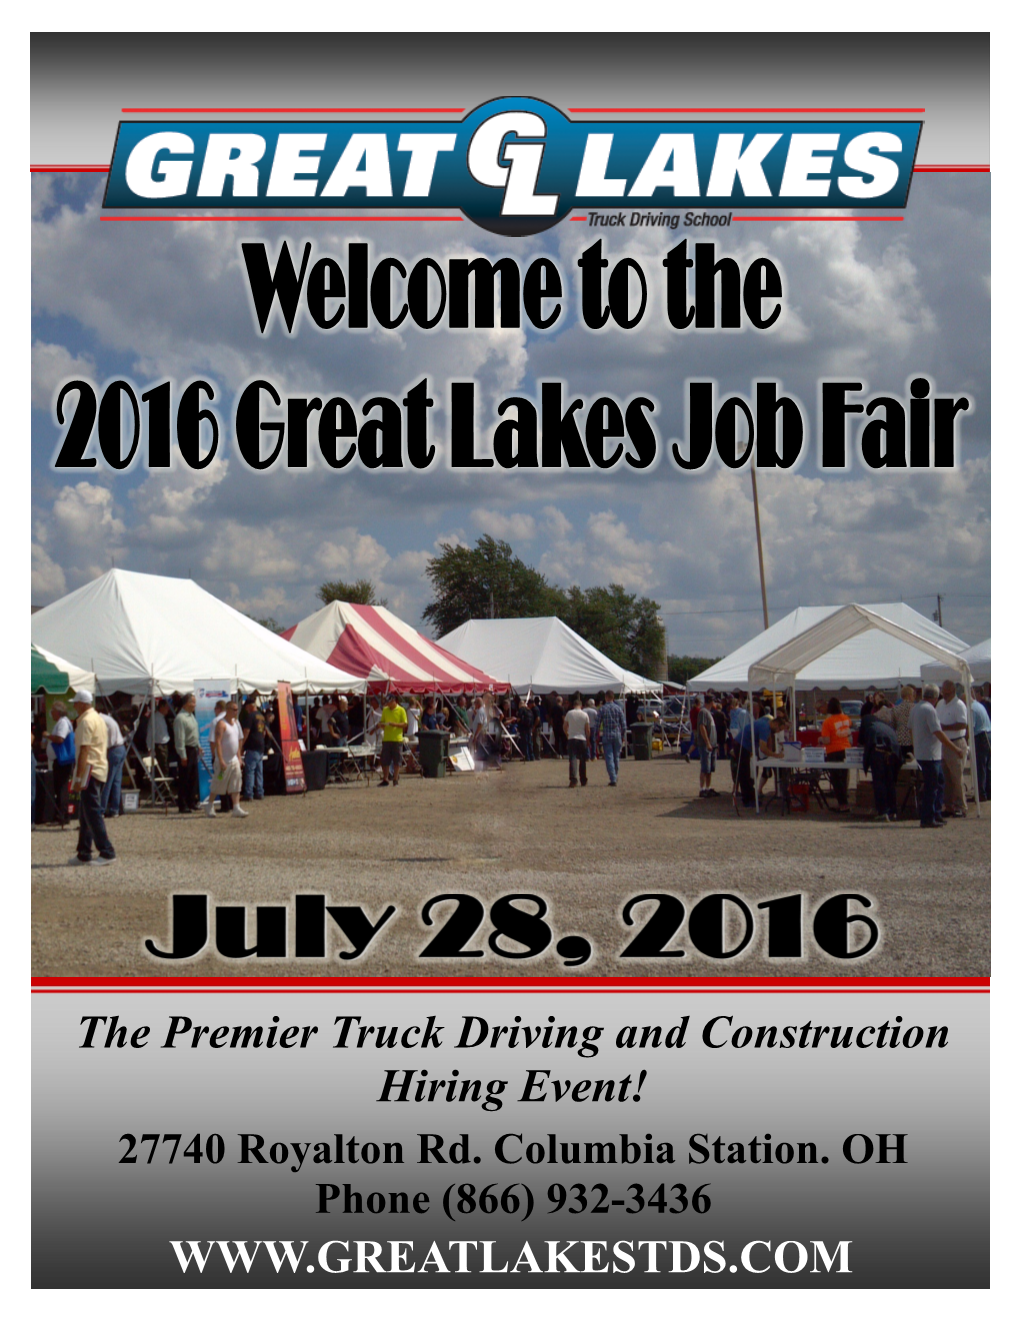 The Premier Truck Driving and Construction Hiring Event!